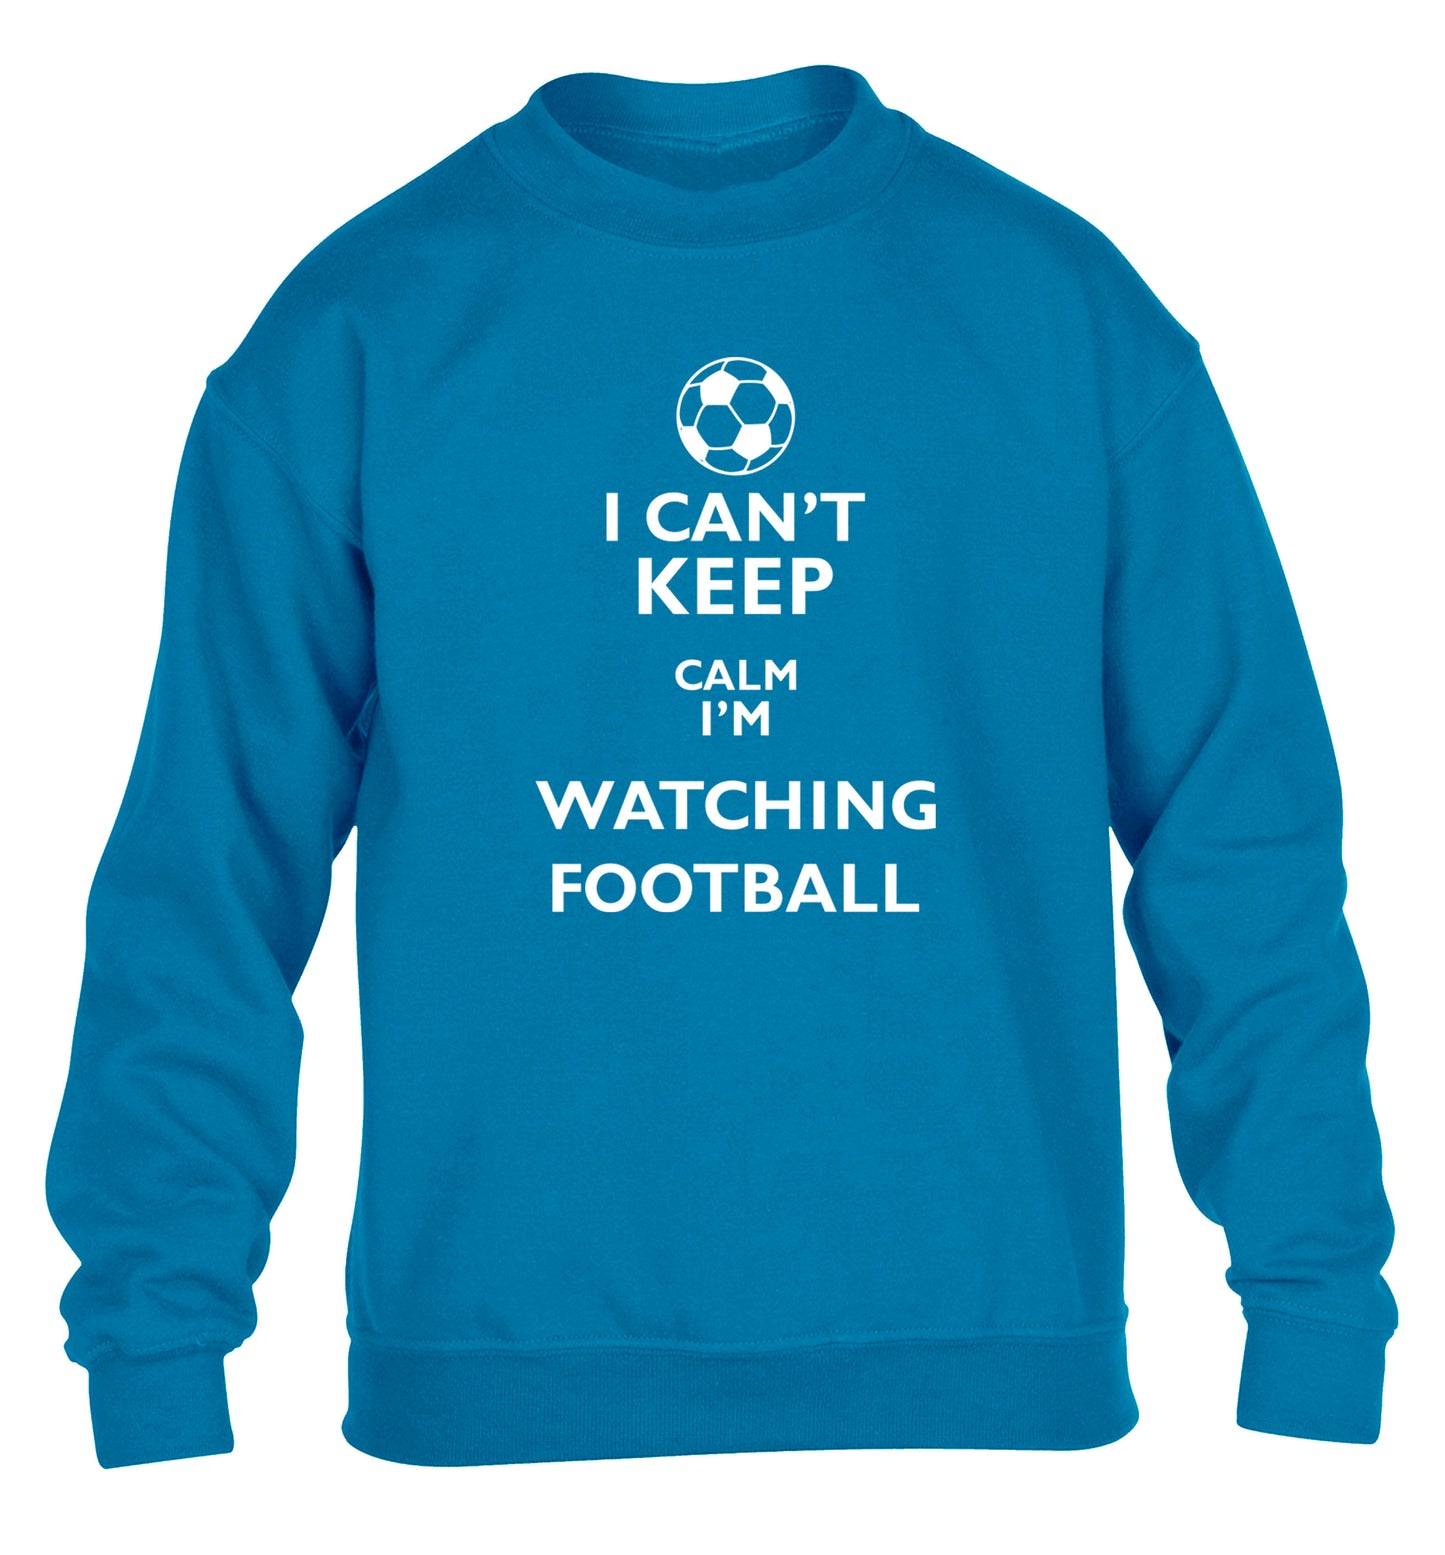 I can't keep calm I'm watching the football children's blue sweater 12-14 Years